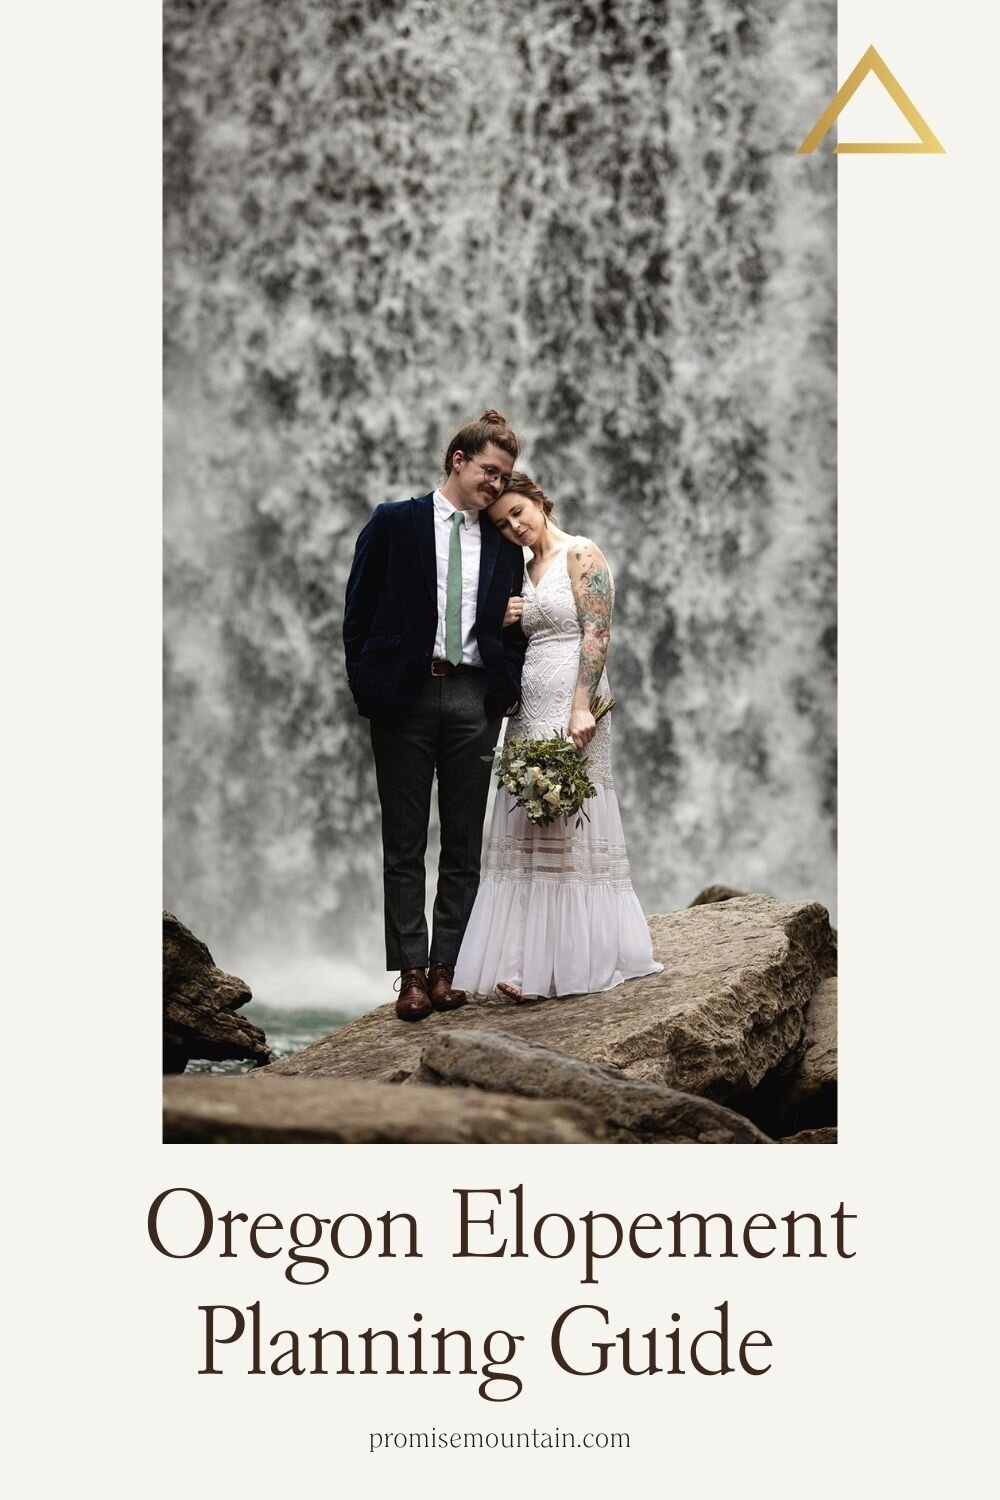 Bride and groom lean against each other in front of a breathtaking waterfall; image overlaid with text that reads Oregon Elopement Planning Guide